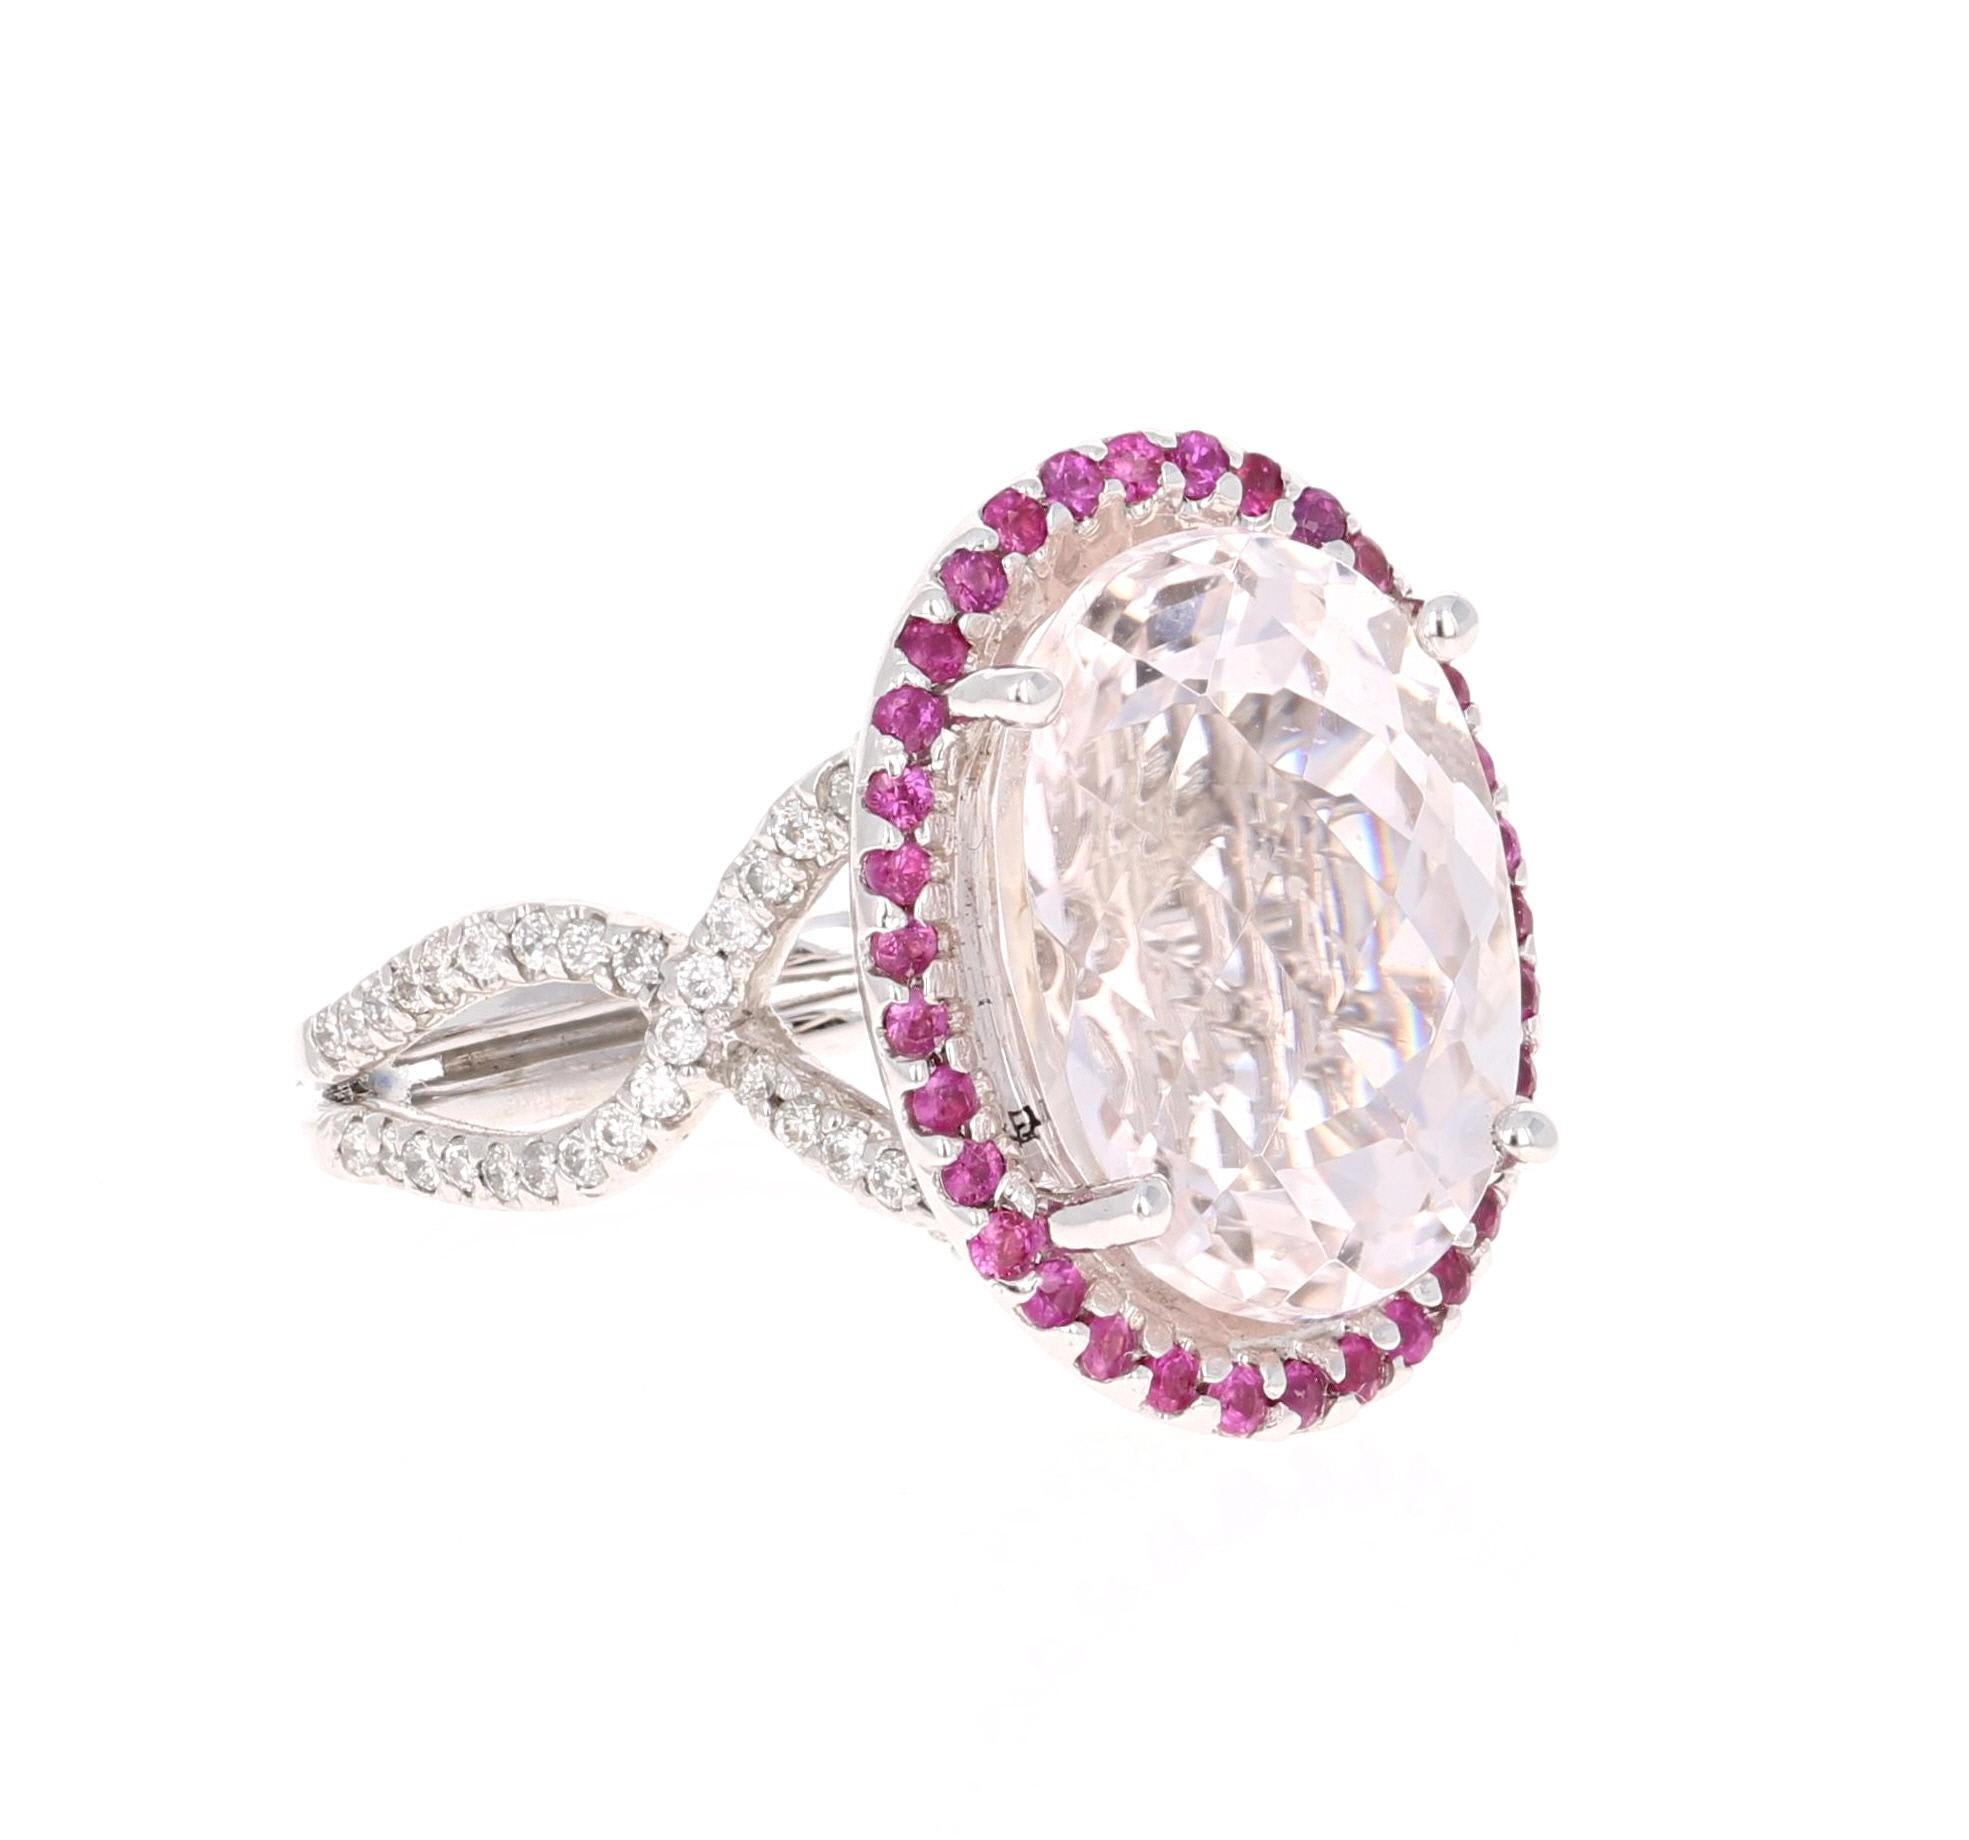 This beautiful ring has a huge Oval Cut 11.73 Carat Kunzite that is set in the center of the ring and is surrounded by 34 Round Cut Pink Sapphires that weigh 0.40 carat. This ring also has 94 Round Cut Diamonds that weigh 0.61 Carats and are set